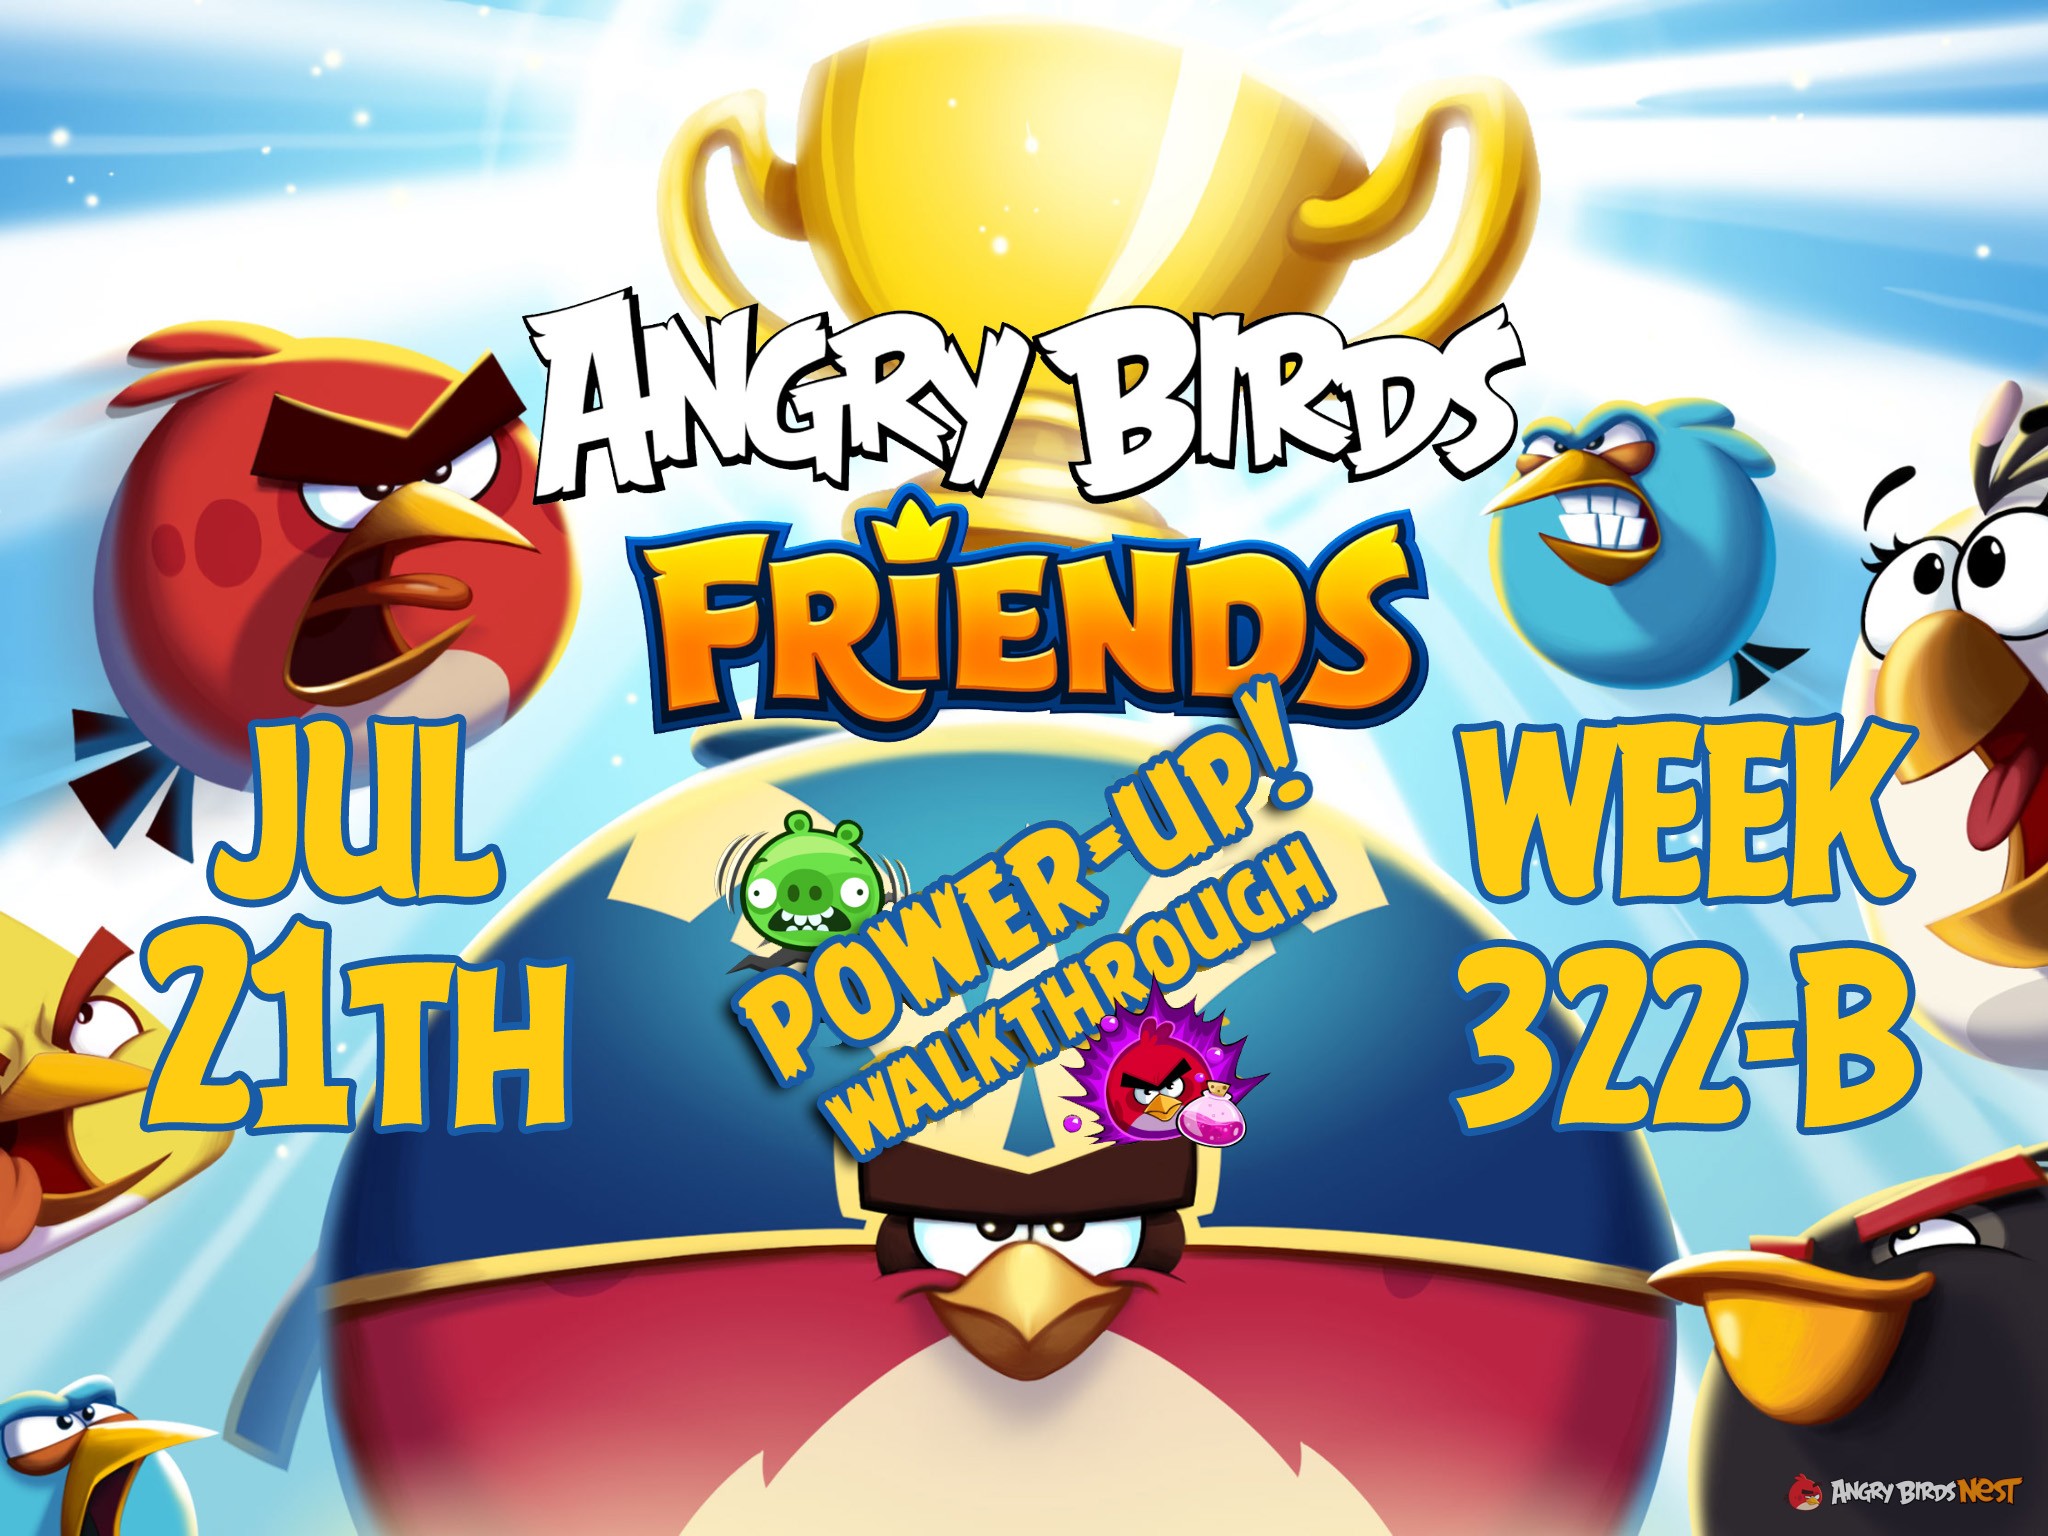 Angry-Birds-Friends-Tournament-Week-322-B-Feature-Image-PU